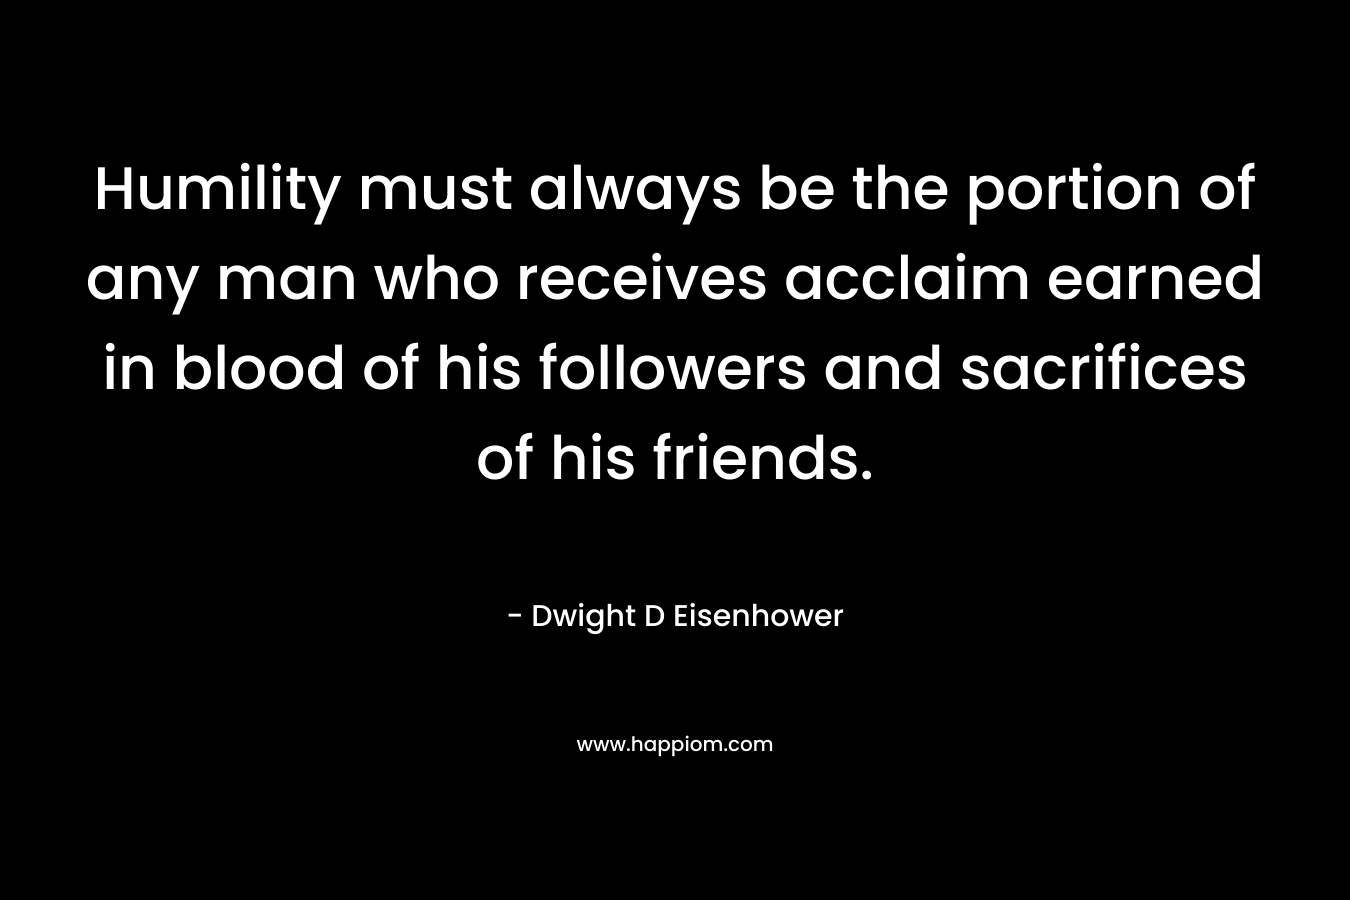 Humility must always be the portion of any man who receives acclaim earned in blood of his followers and sacrifices of his friends.